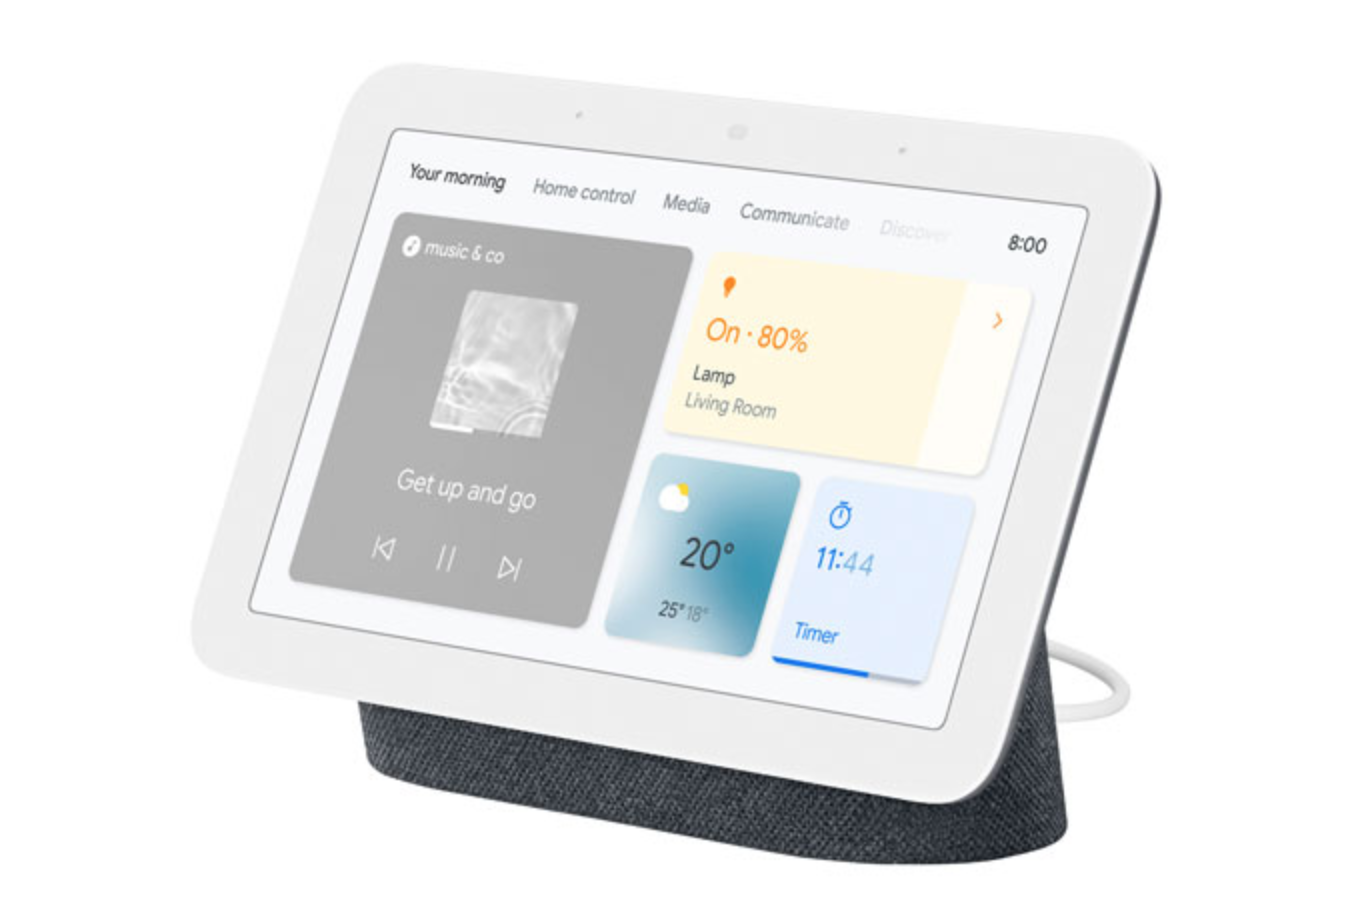 image of the Google Nest Hub 2nd Gen displaying various apps